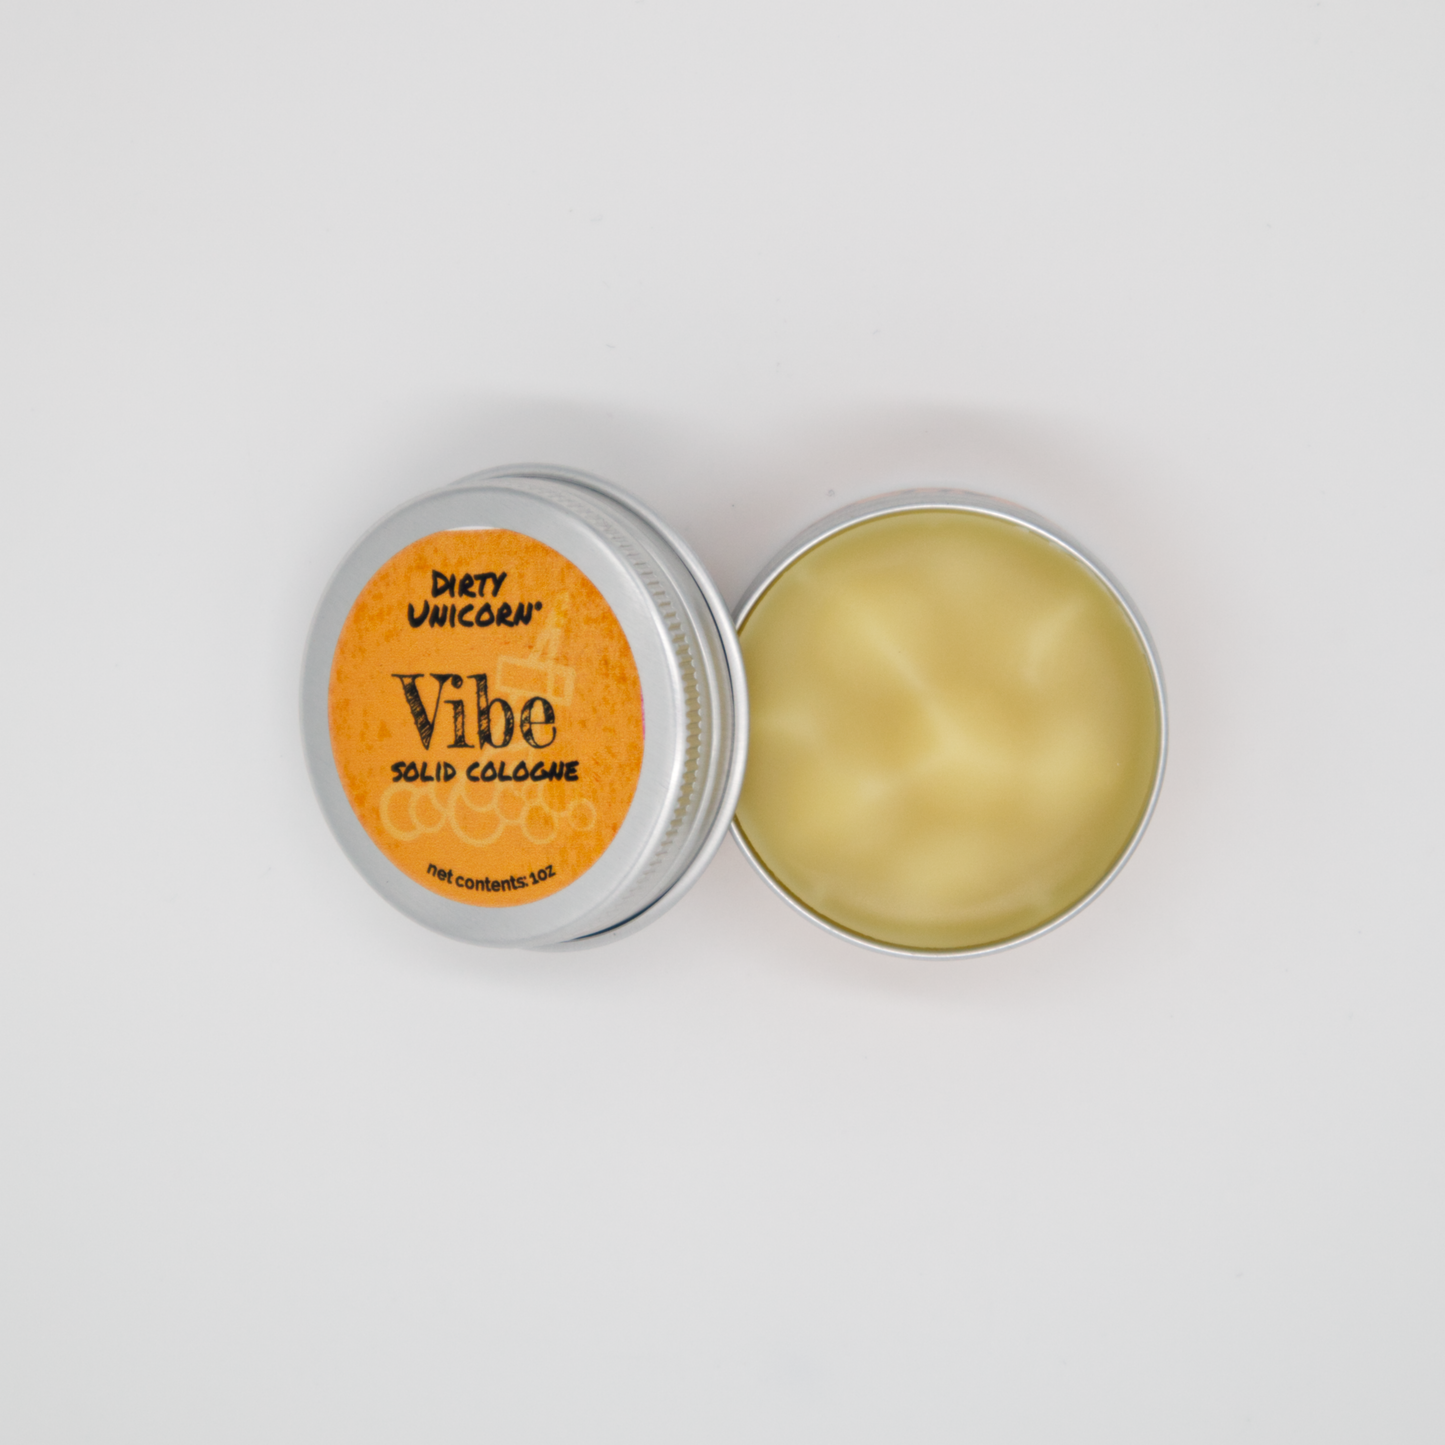 Vibe Solid Cologne